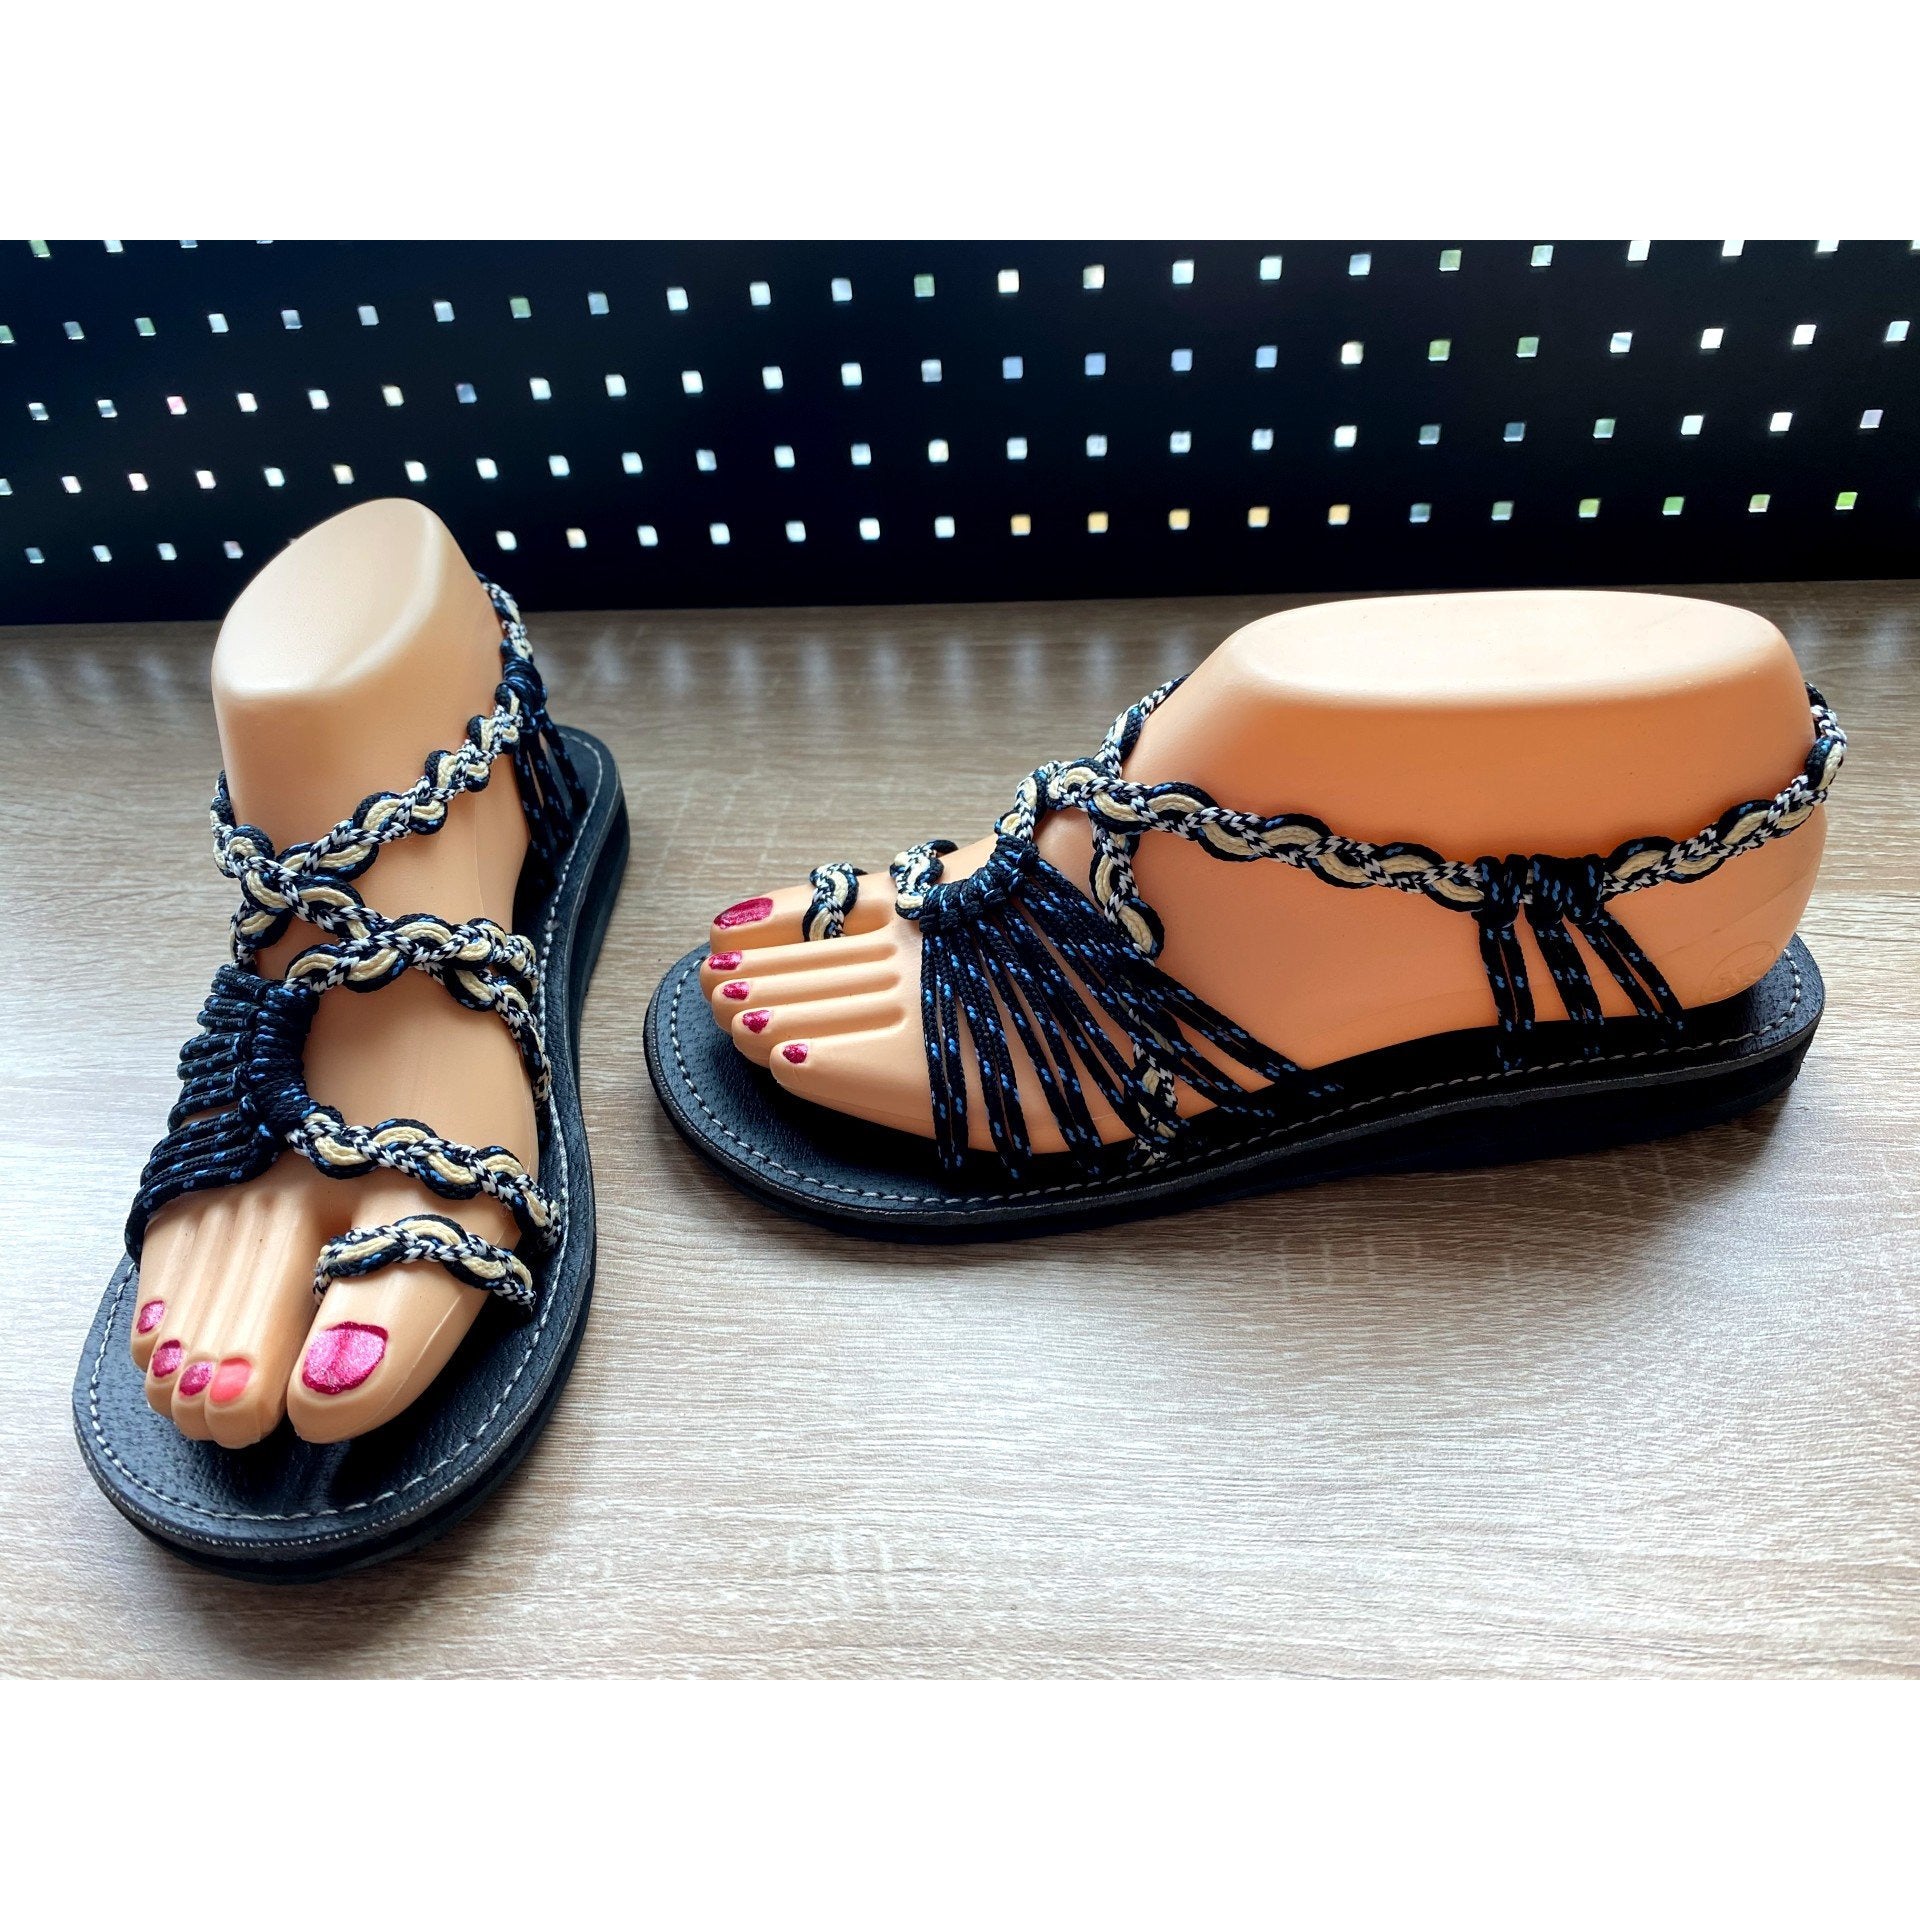 Shoes - Braided Sandals